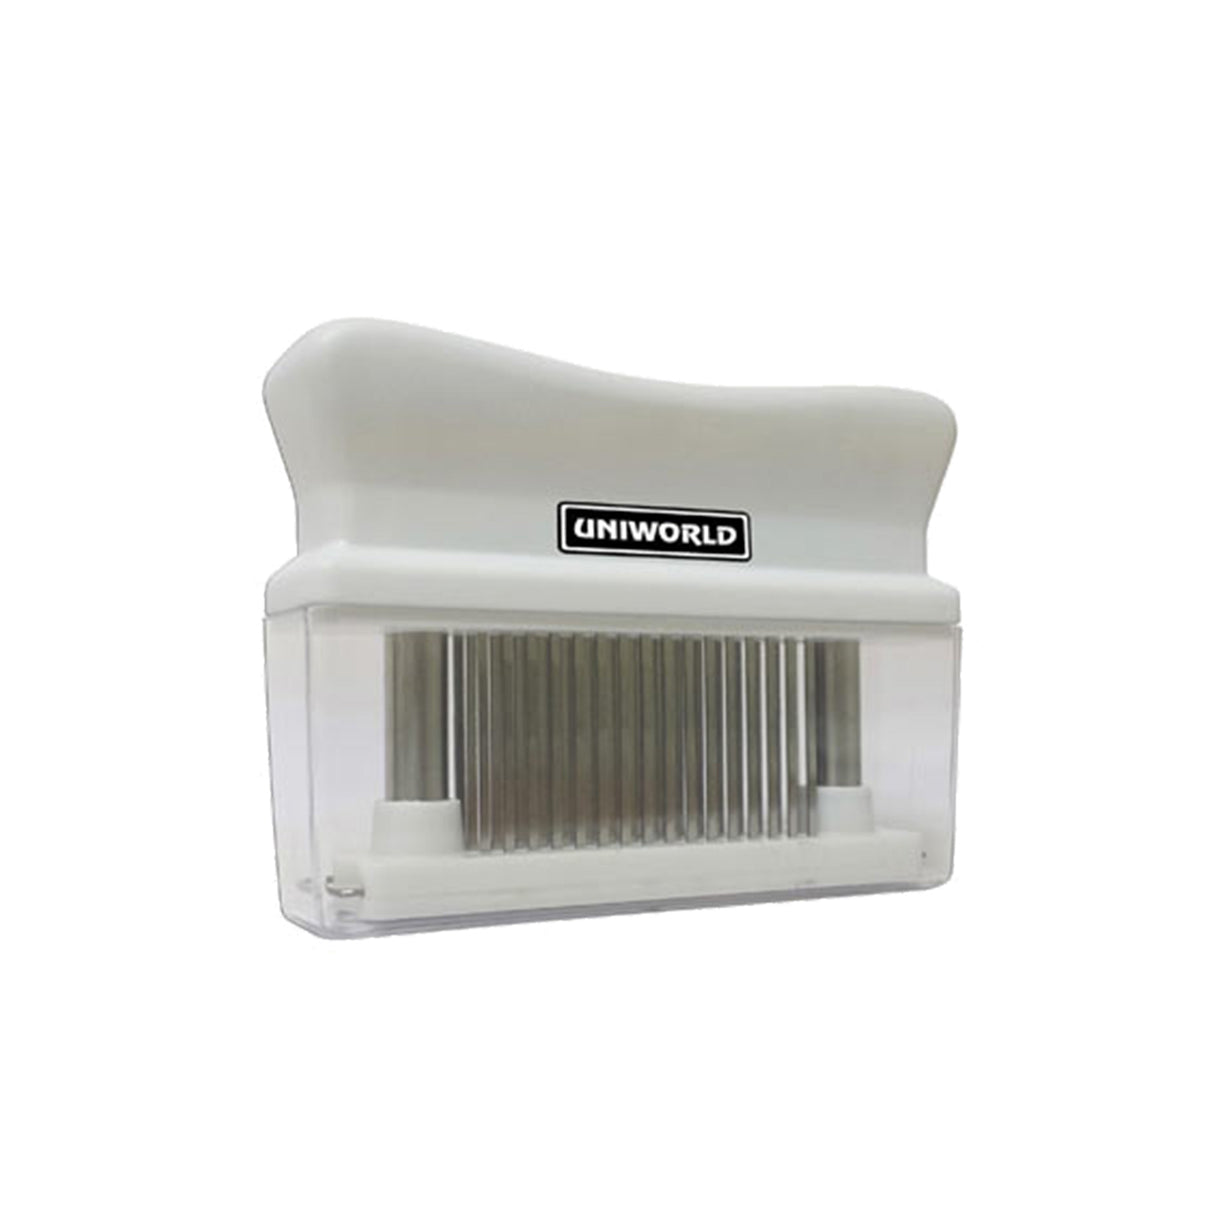 UMT-48 | Portable Meat Tenderizer